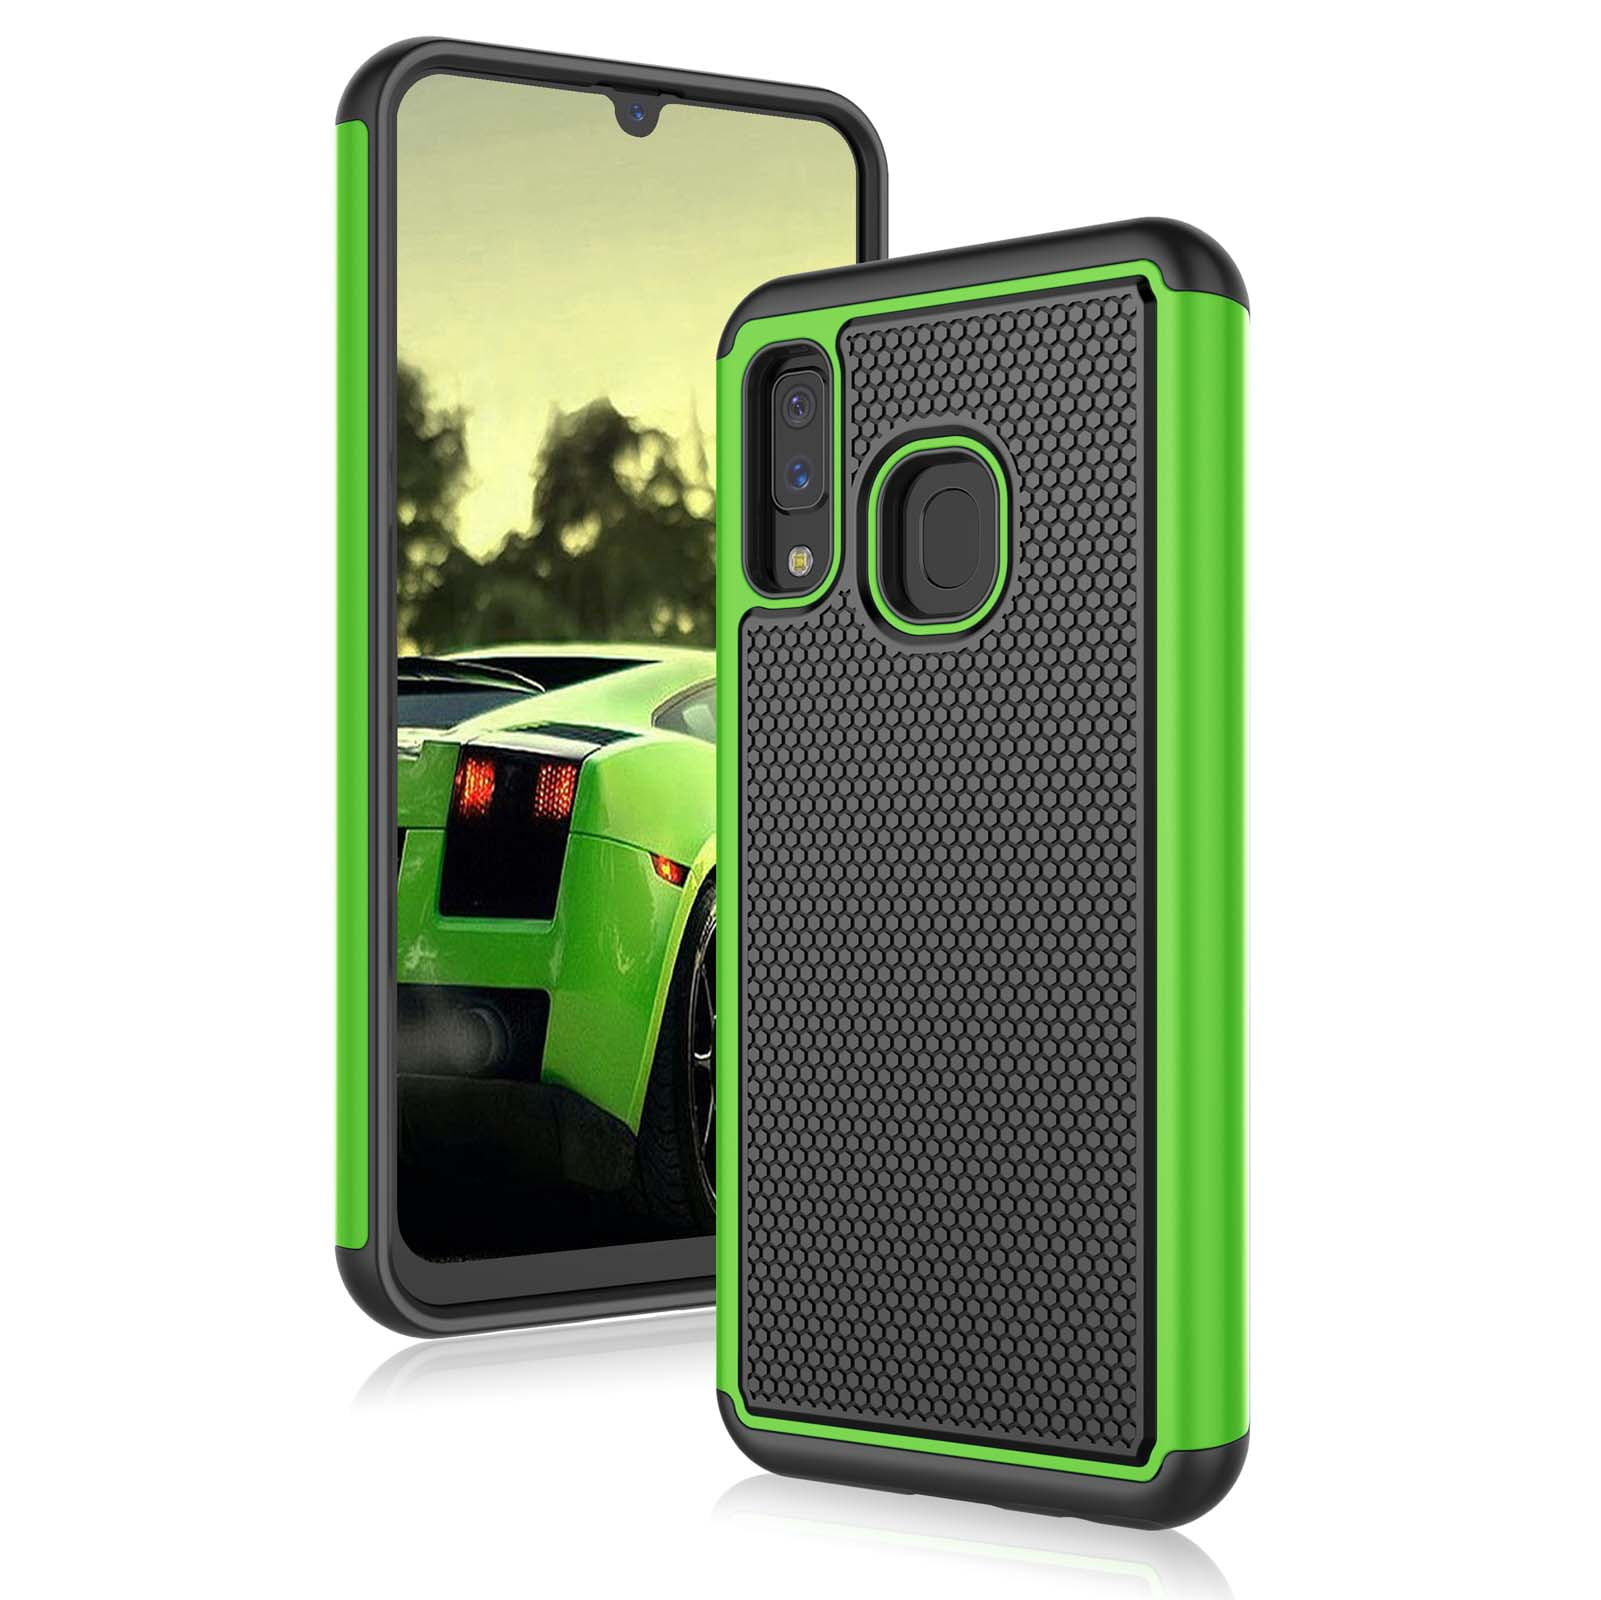 Everainy Compatible for Samsung Galaxy A20e 2019 Case Silicone Ultra Slim Bumper Funny Cover Black Soft Thin TPU Rubber Shockproof Protective Cute Covers I need my space